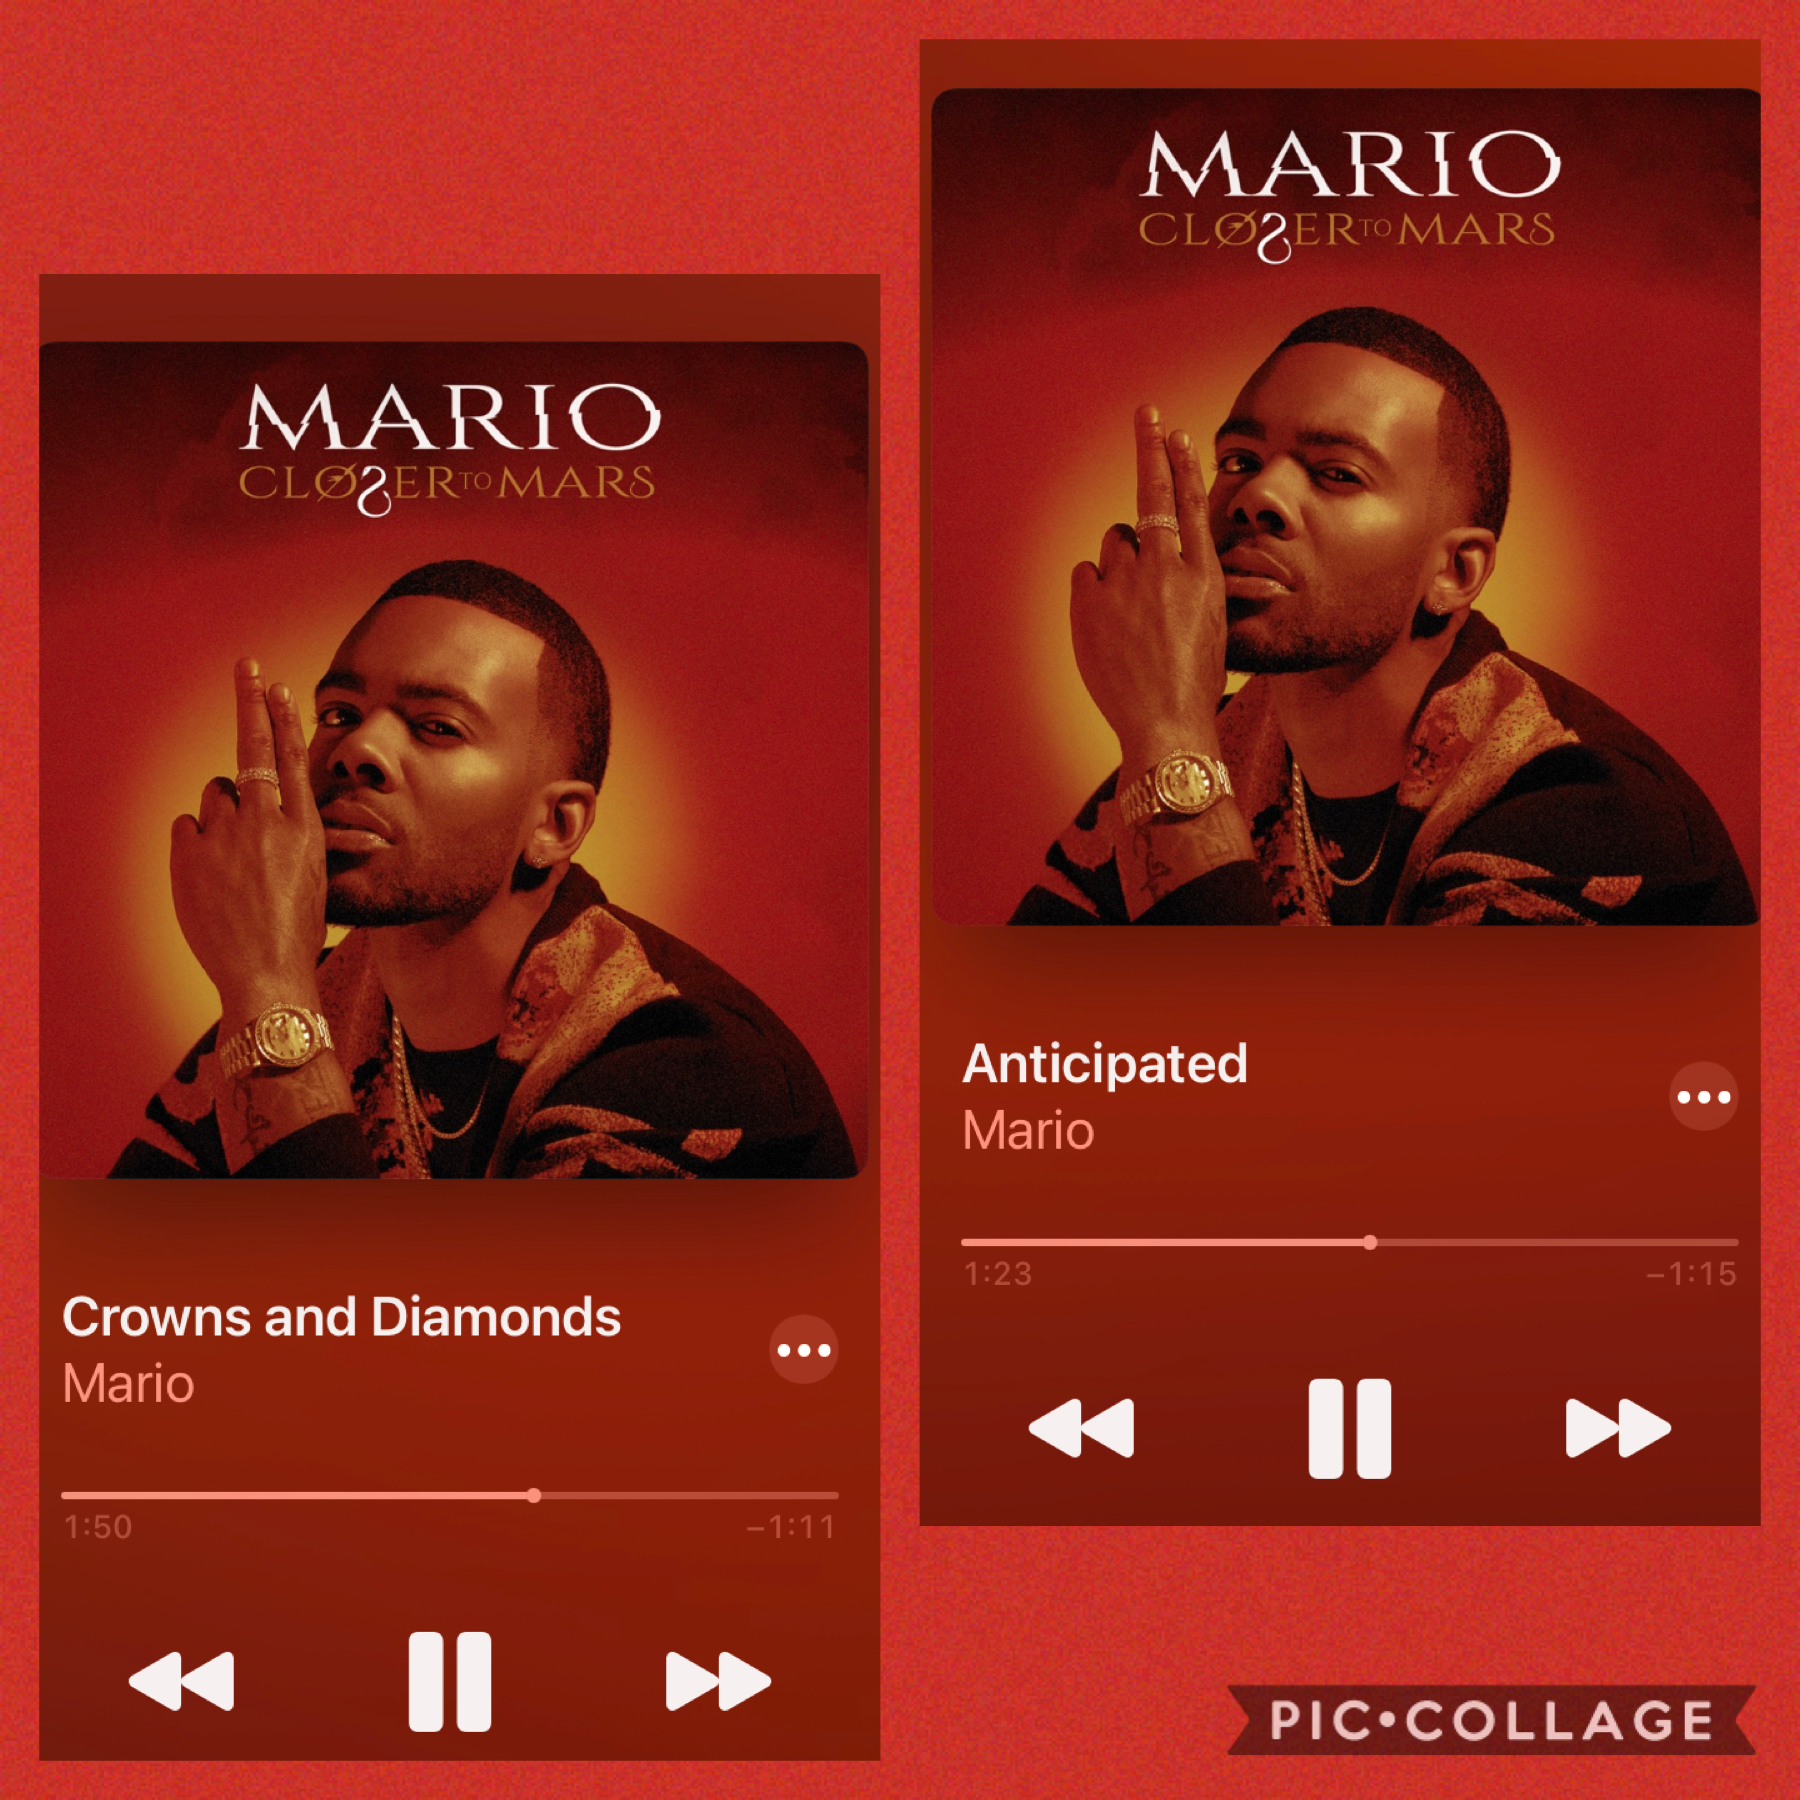 I love these songs by Mario💜